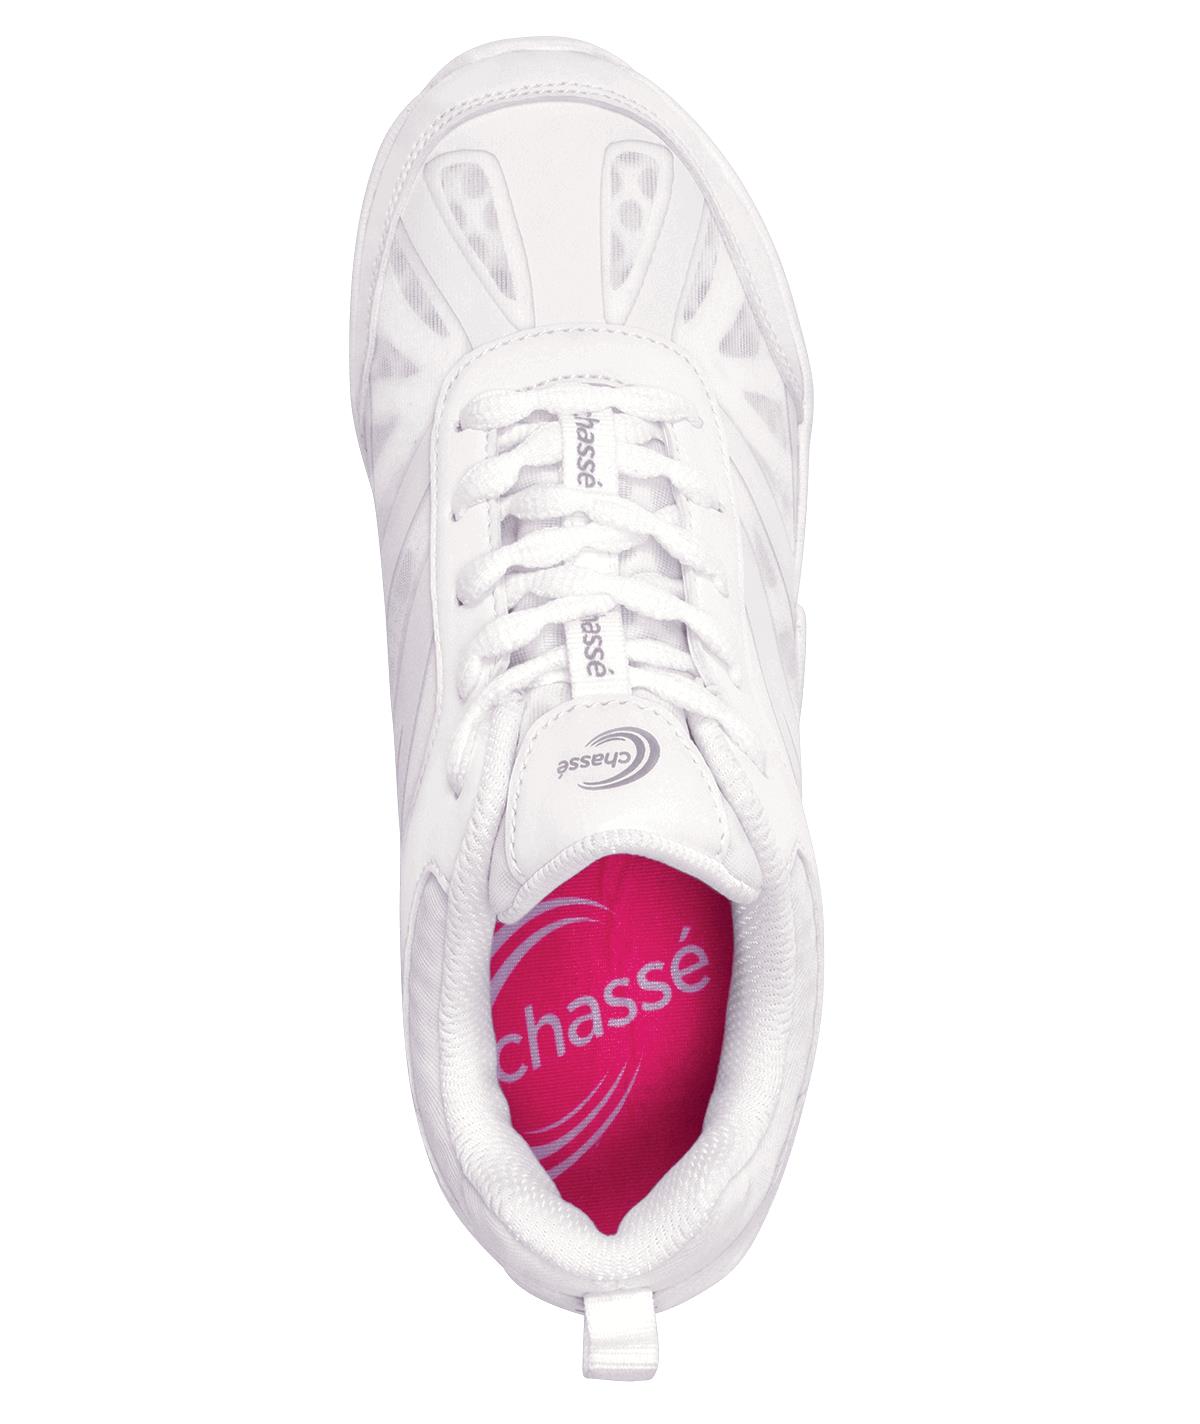 chasse cheer sneakers